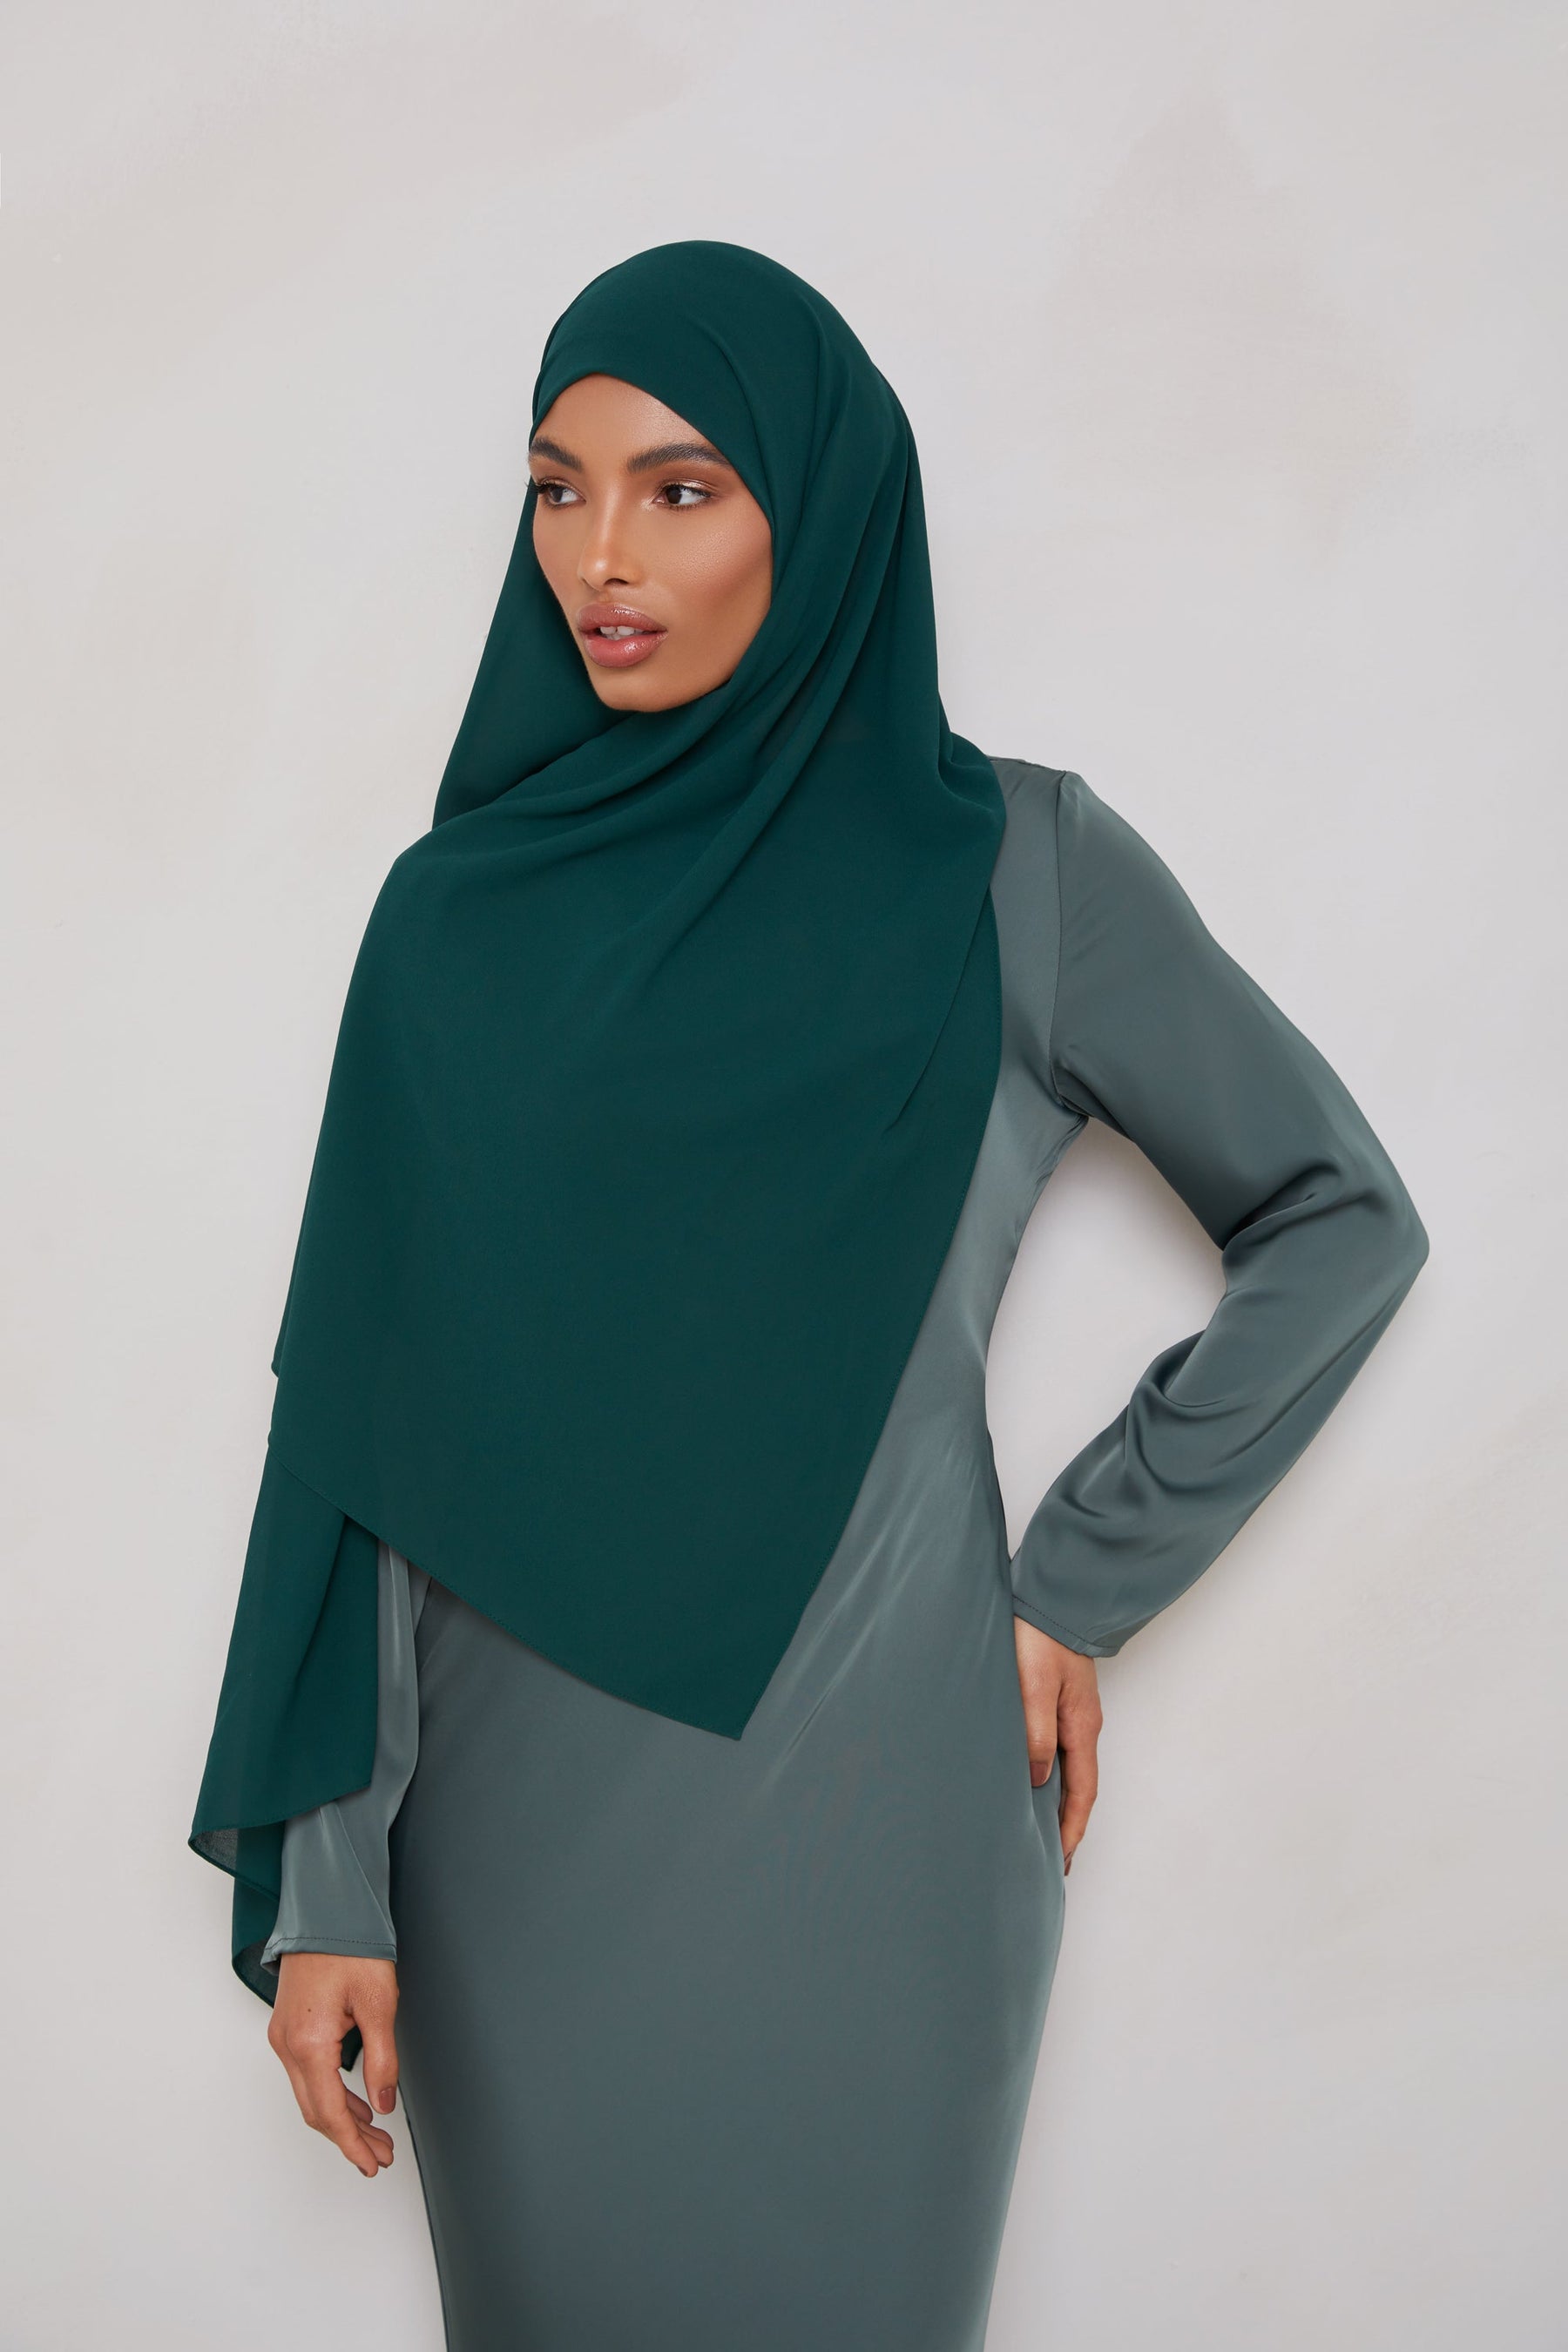 Essential Chiffon Hijab - Deep Teal Scarves & Shawls Veiled Collection 